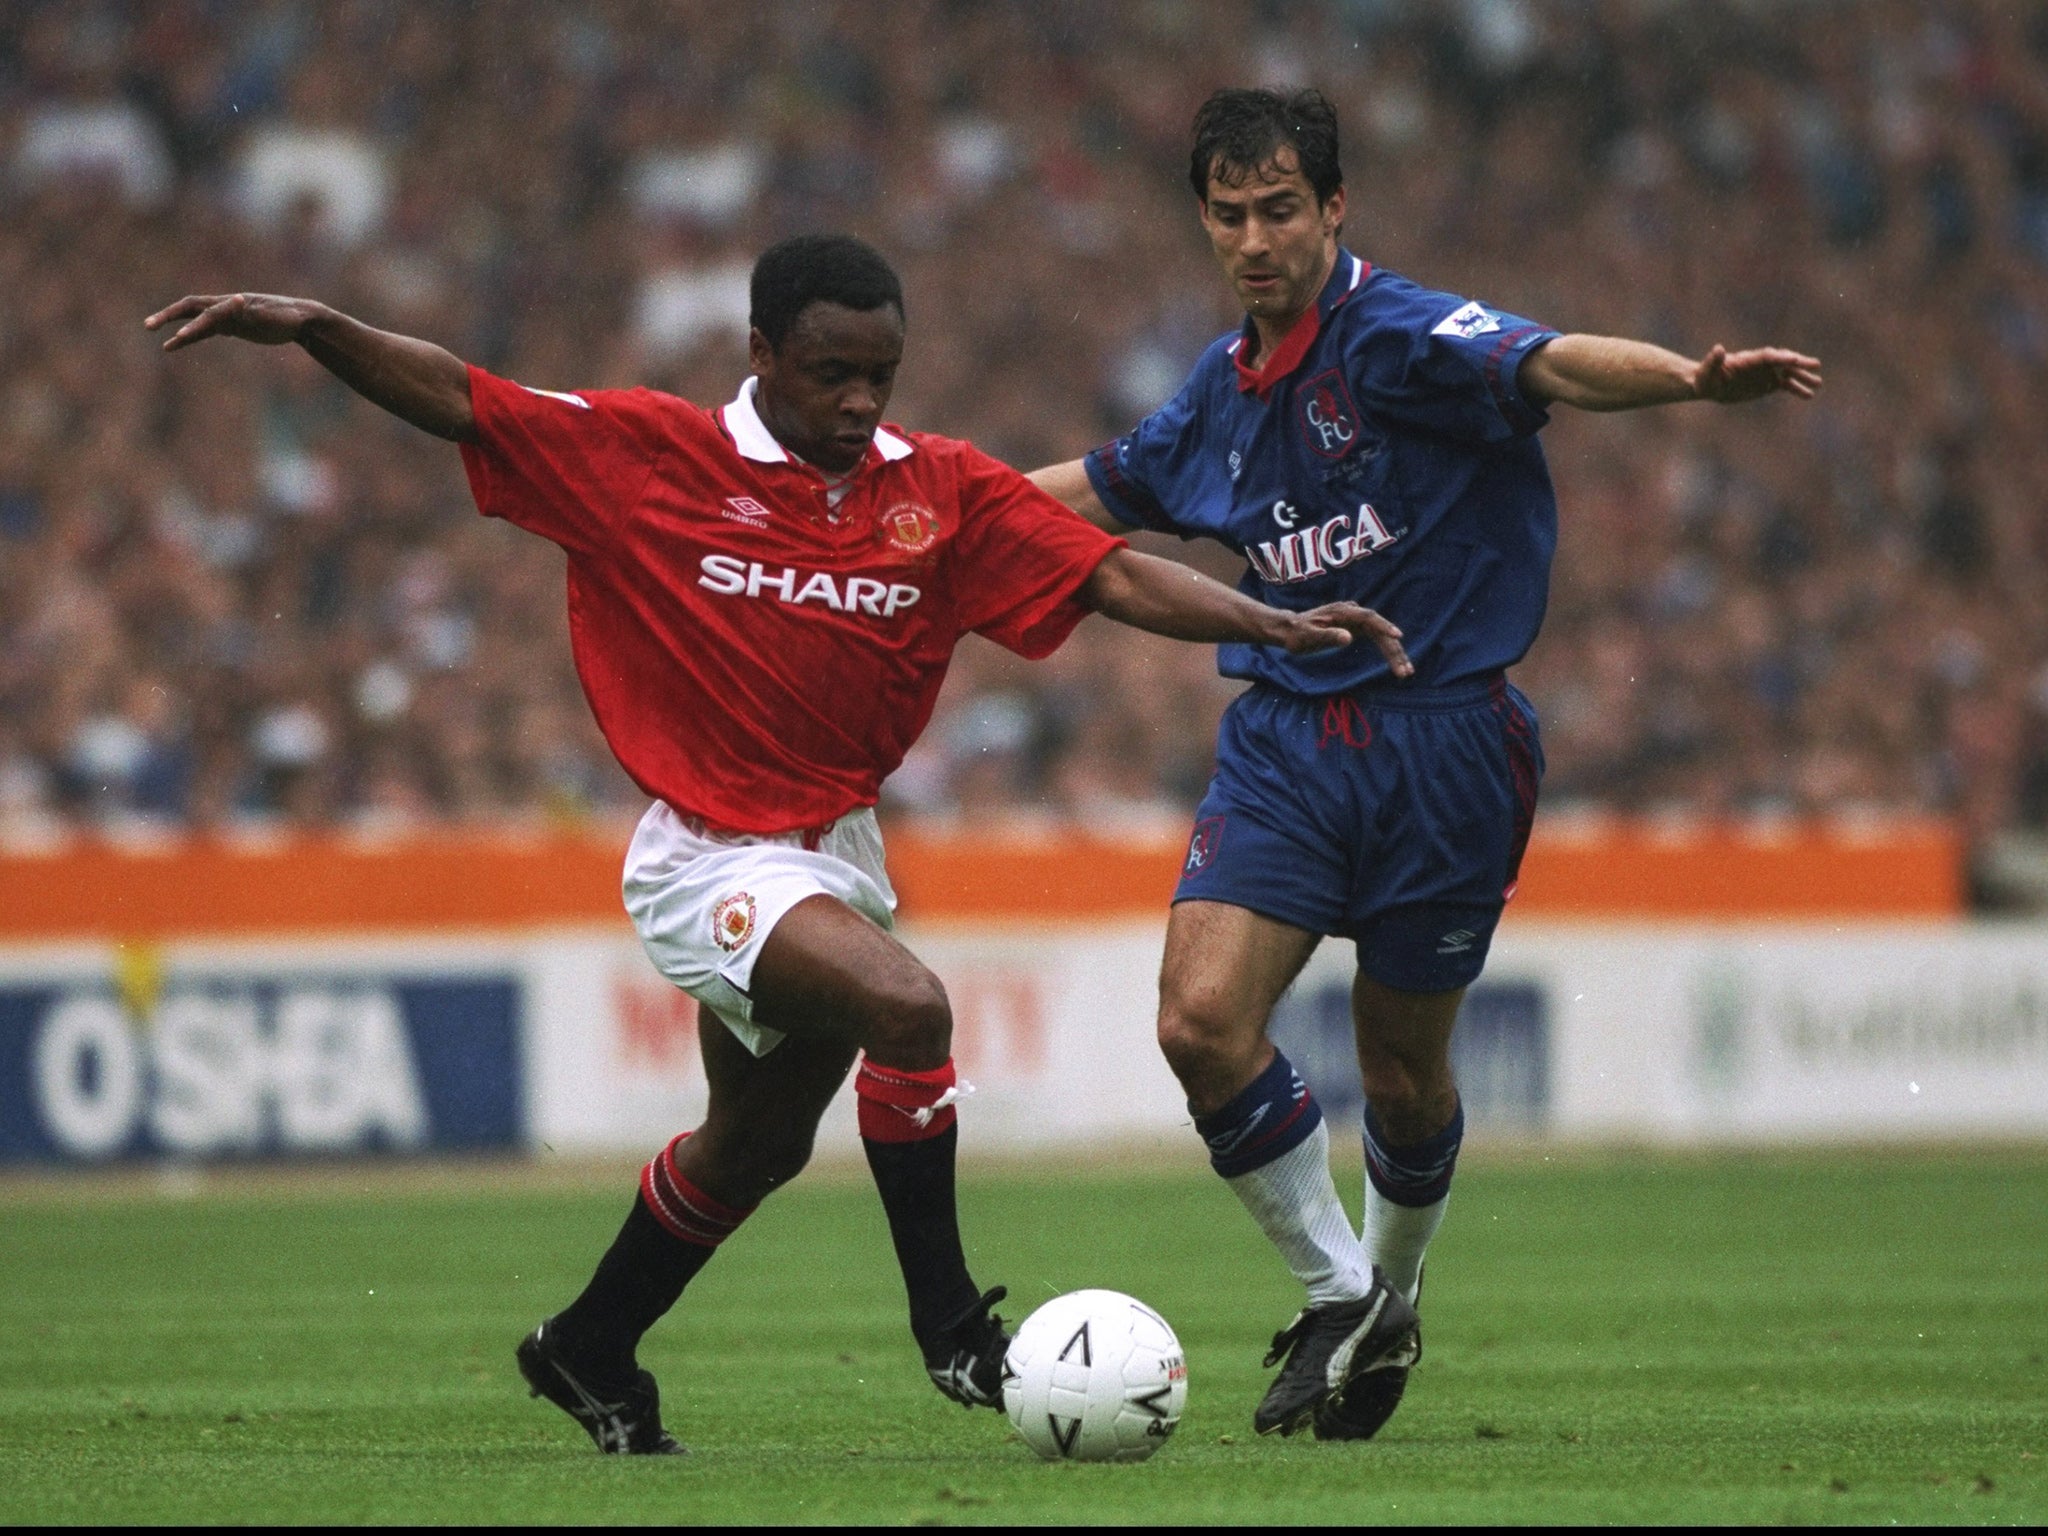 Peacock playing for Chelsea in the 1994 FA Cup final with Chelsea